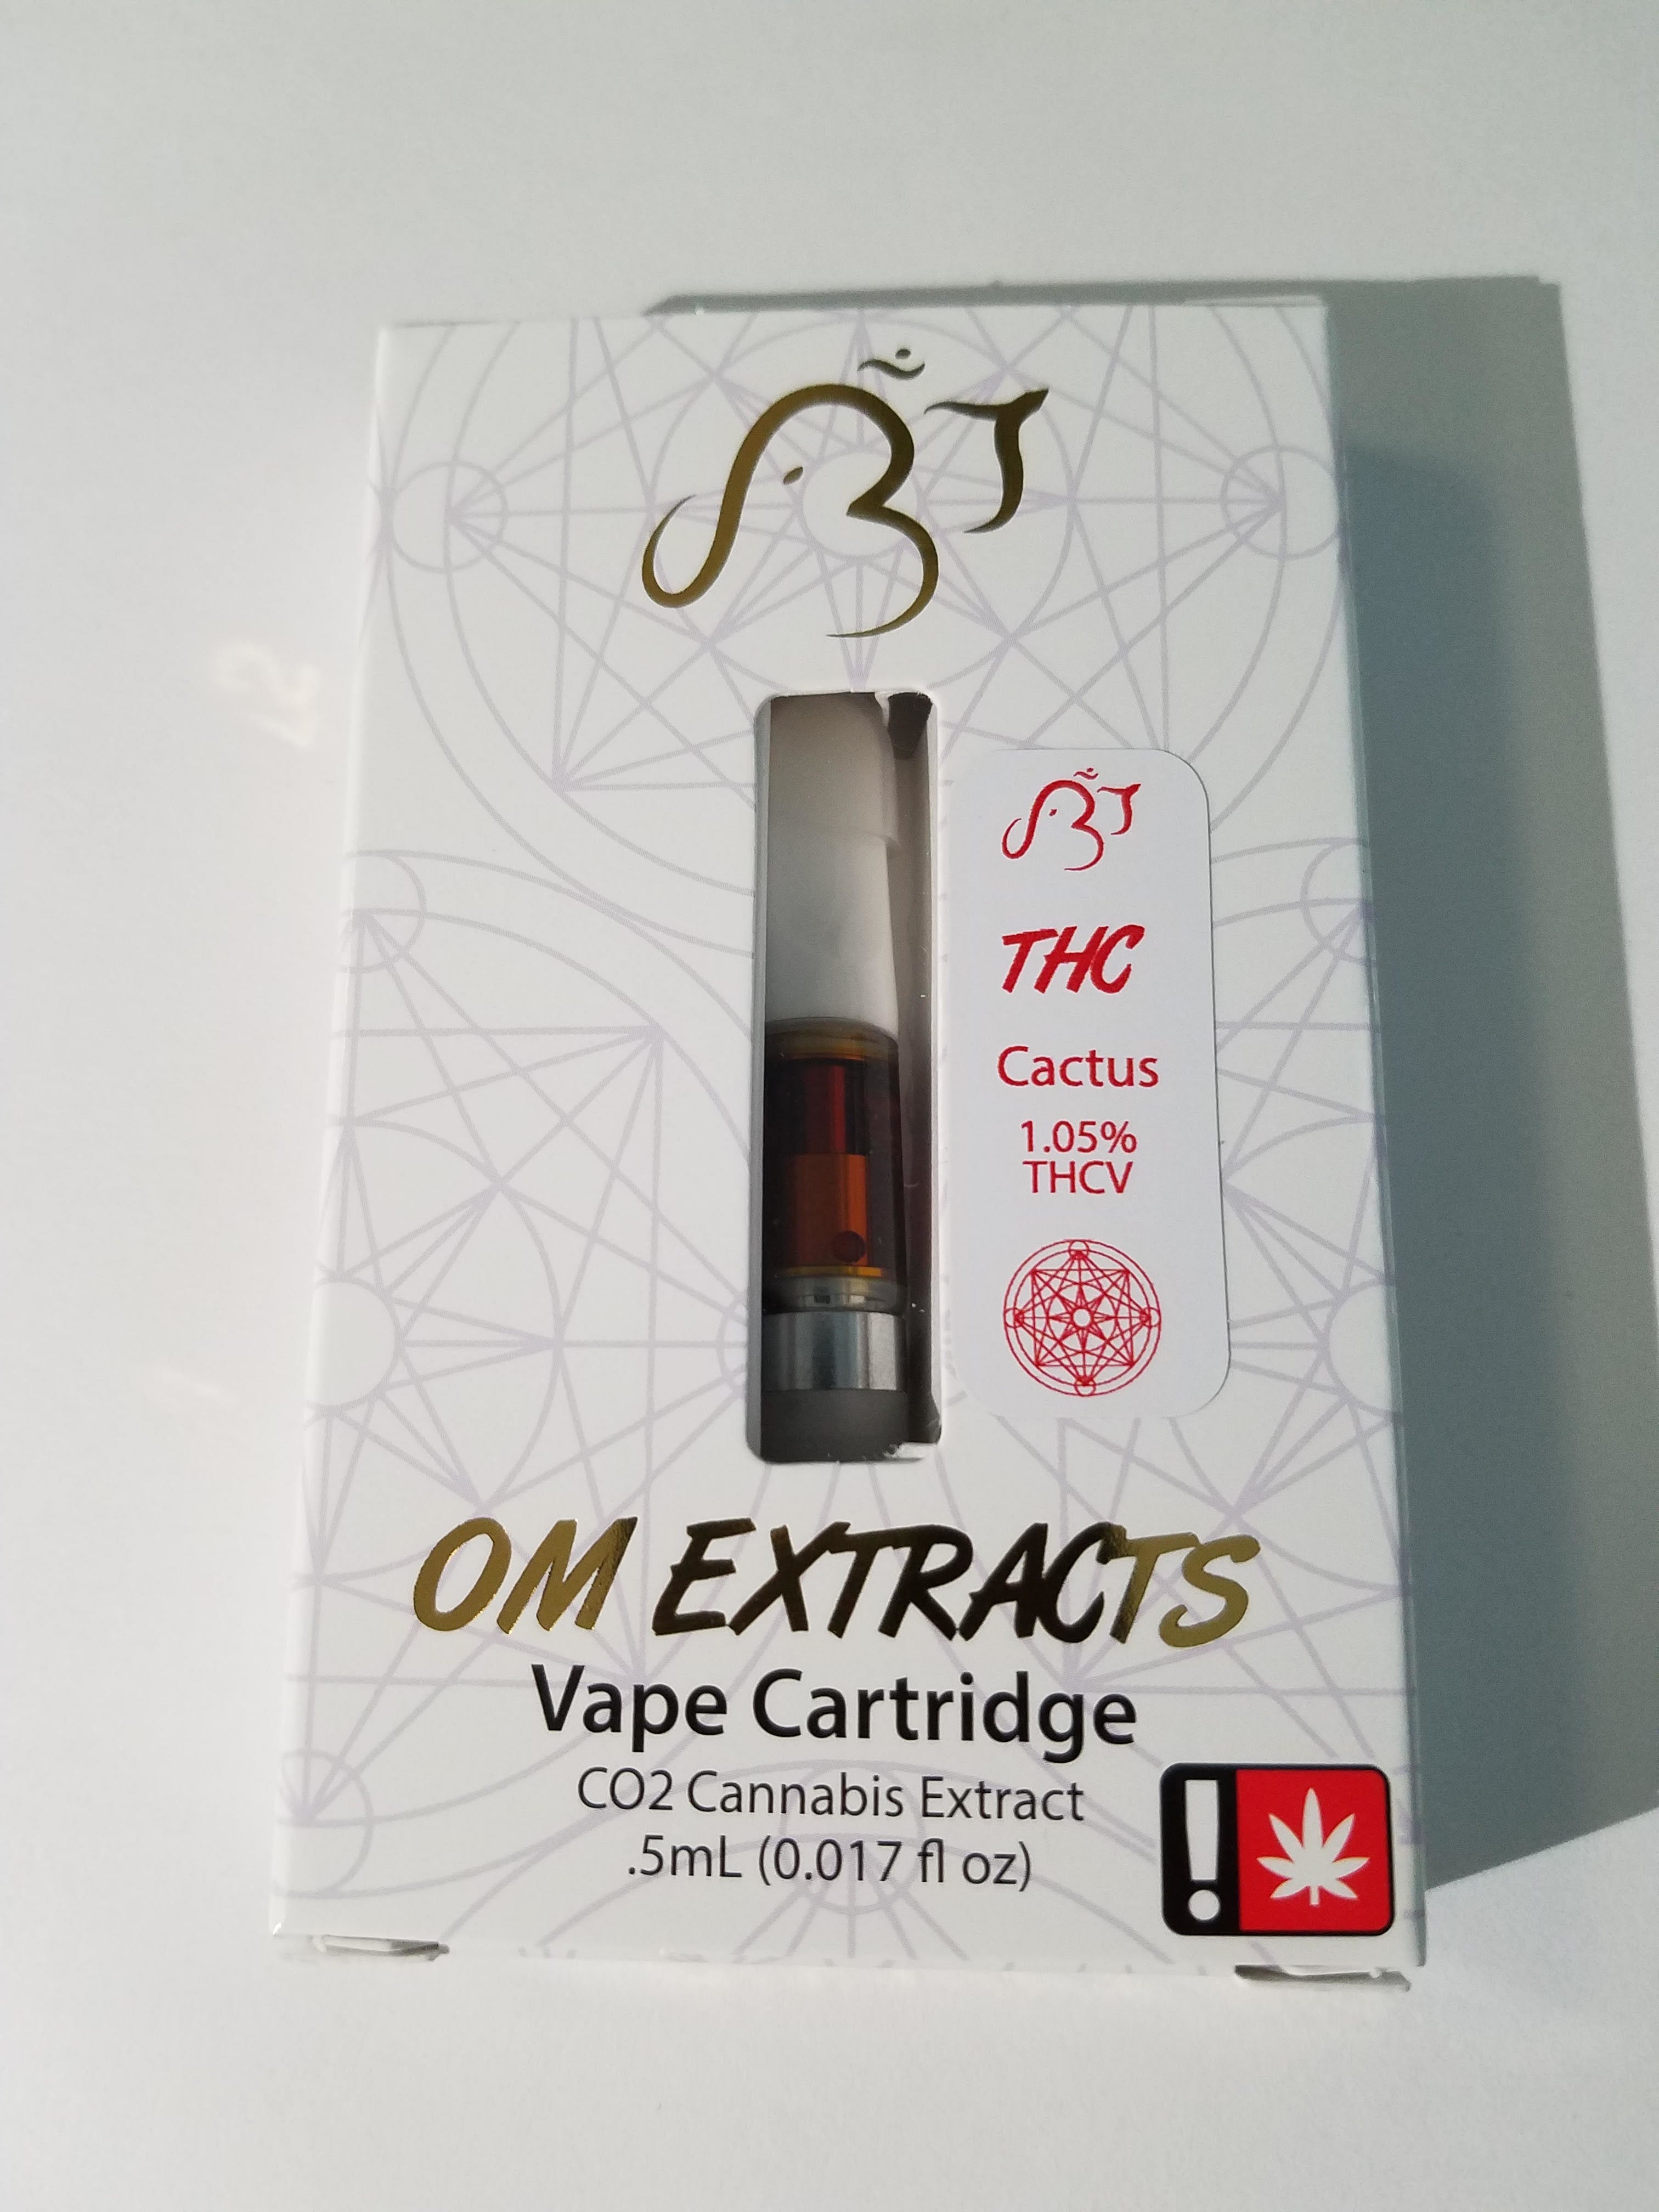 concentrate-5g-cactus-cartridge-om-extracts